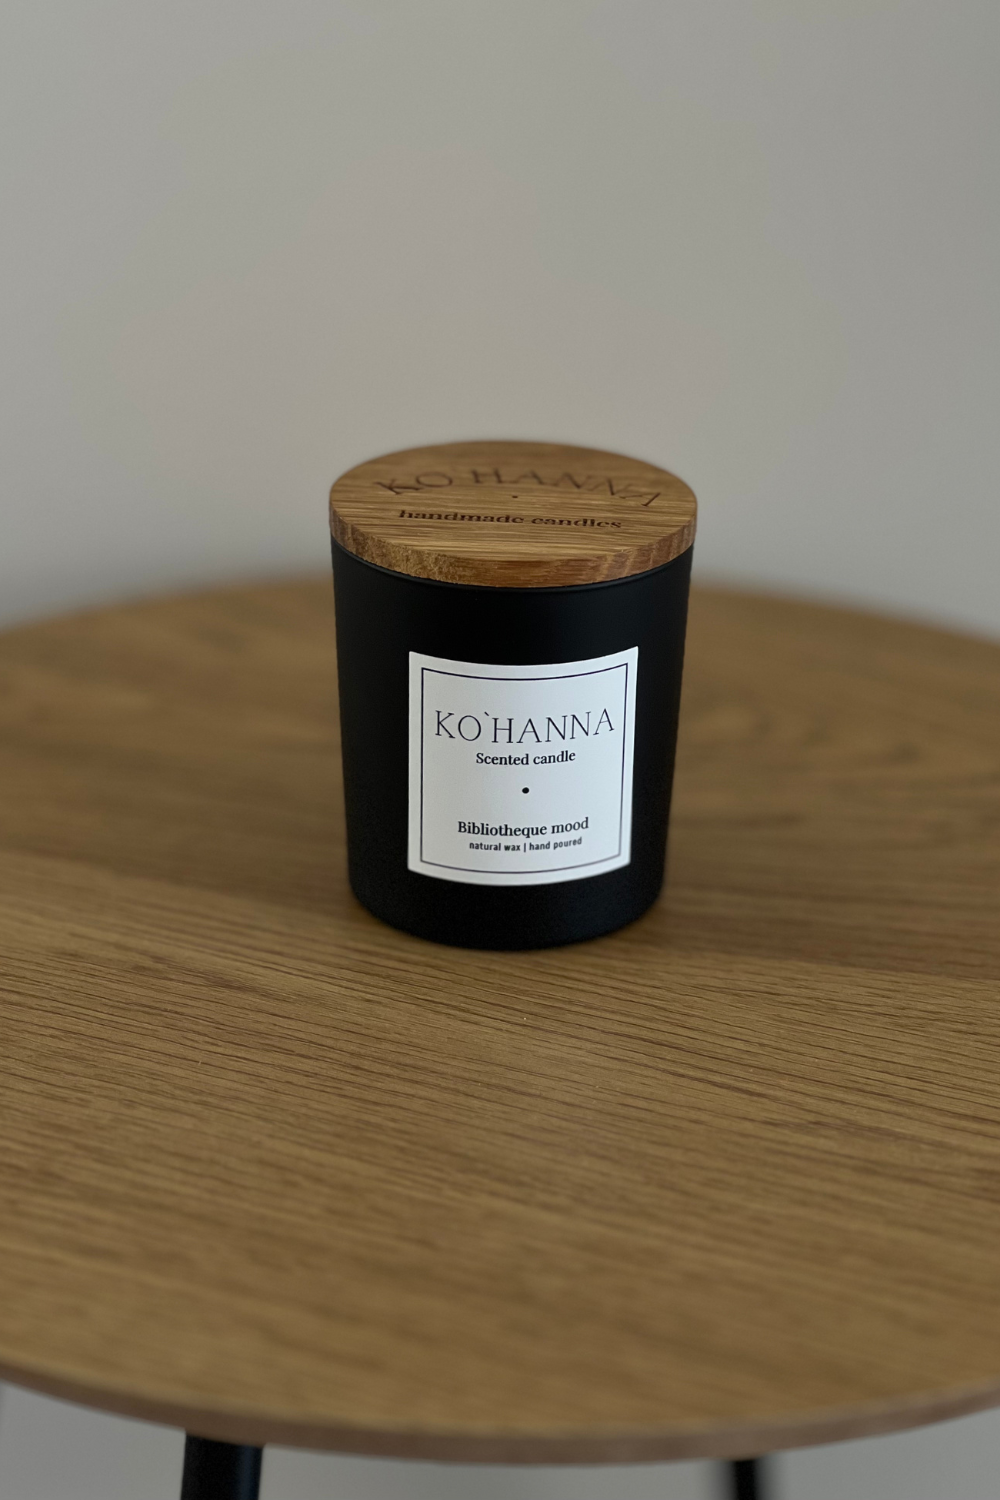 Black frosted glass, handmade scented candle, Mood of the library (Bibliotheque), 250 ml. (KO&